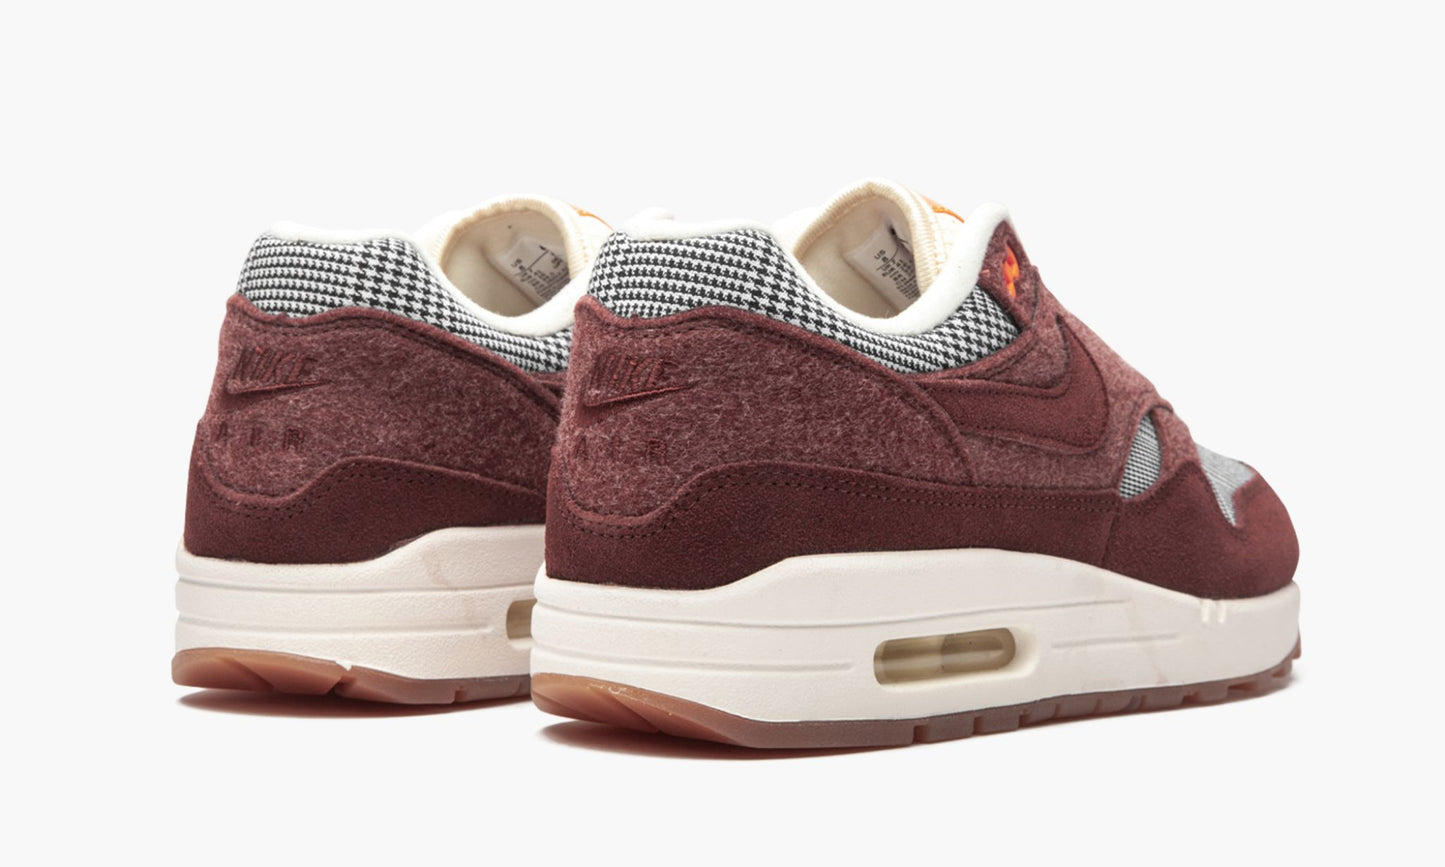 Air Max 1 "Houndstooth"